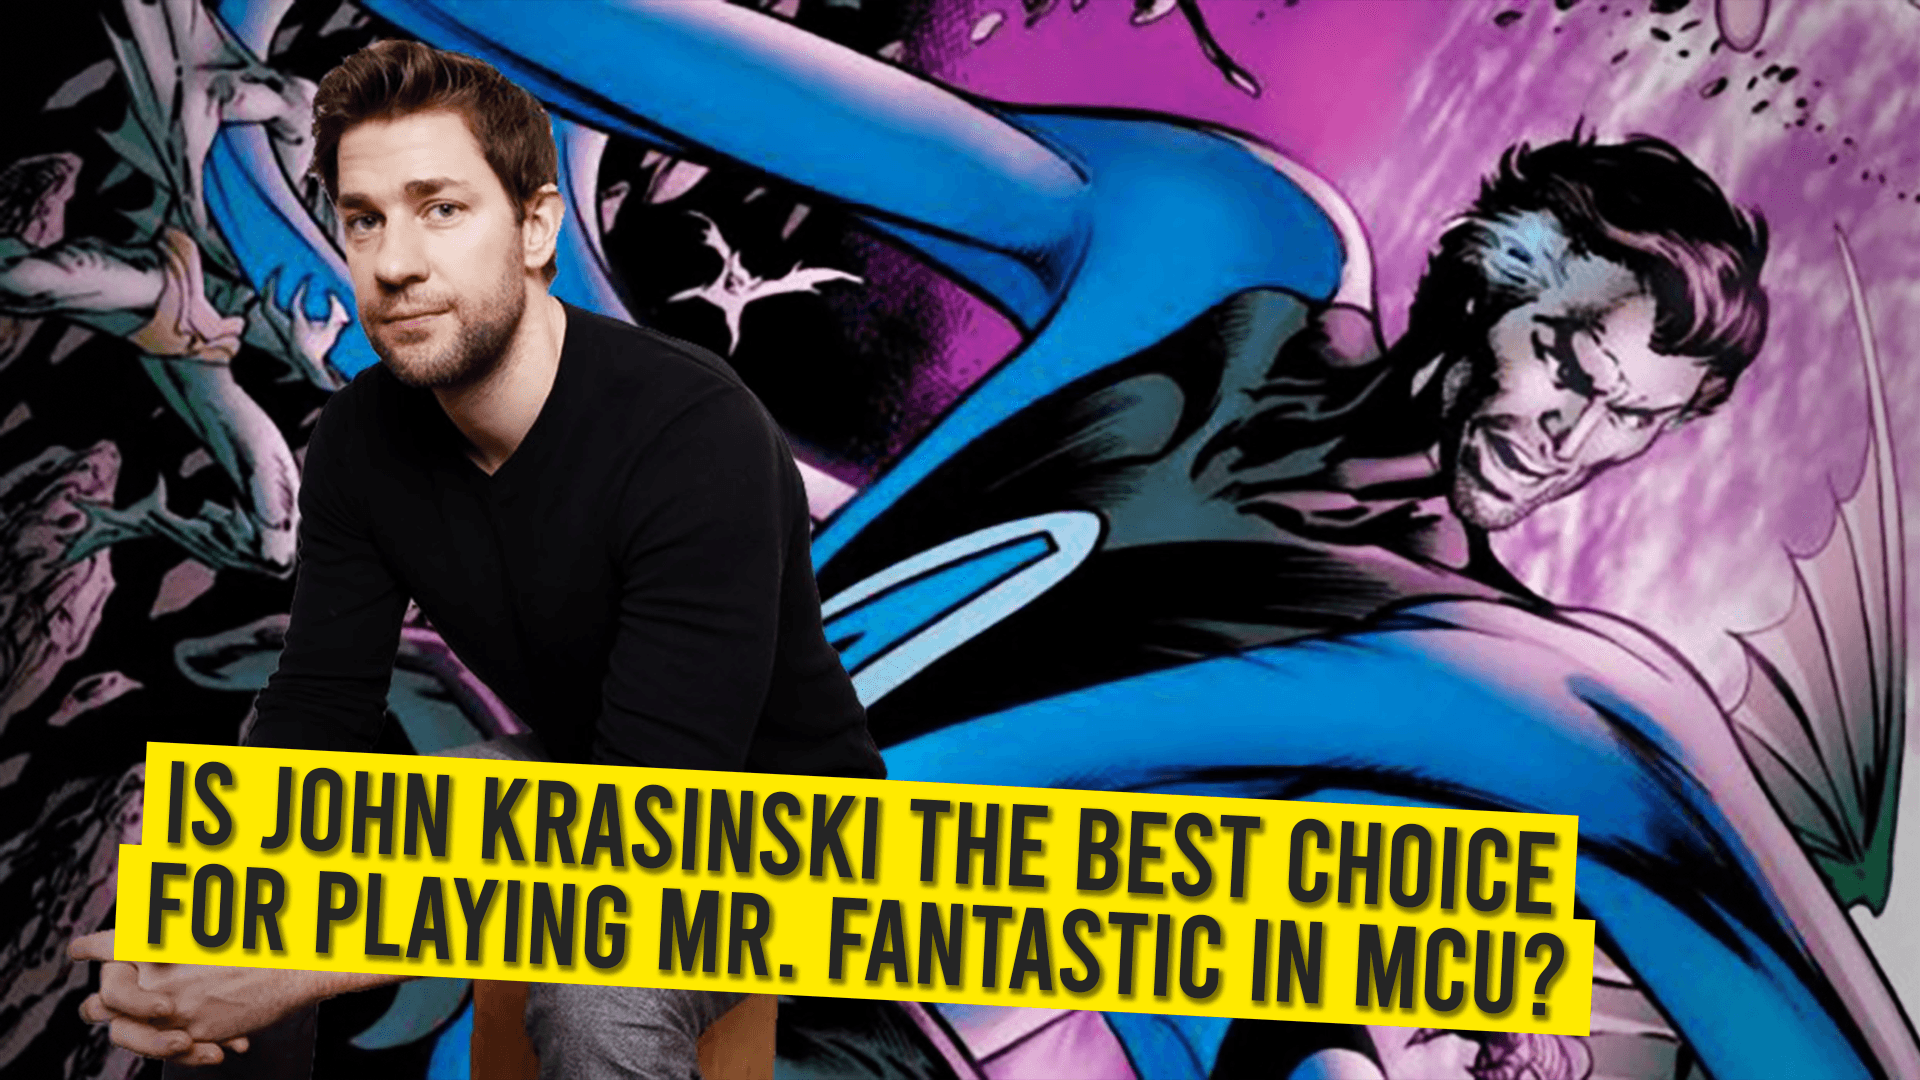 Is John Krasinki The Best Choice For Playing Mr. Fantastic In MCU?